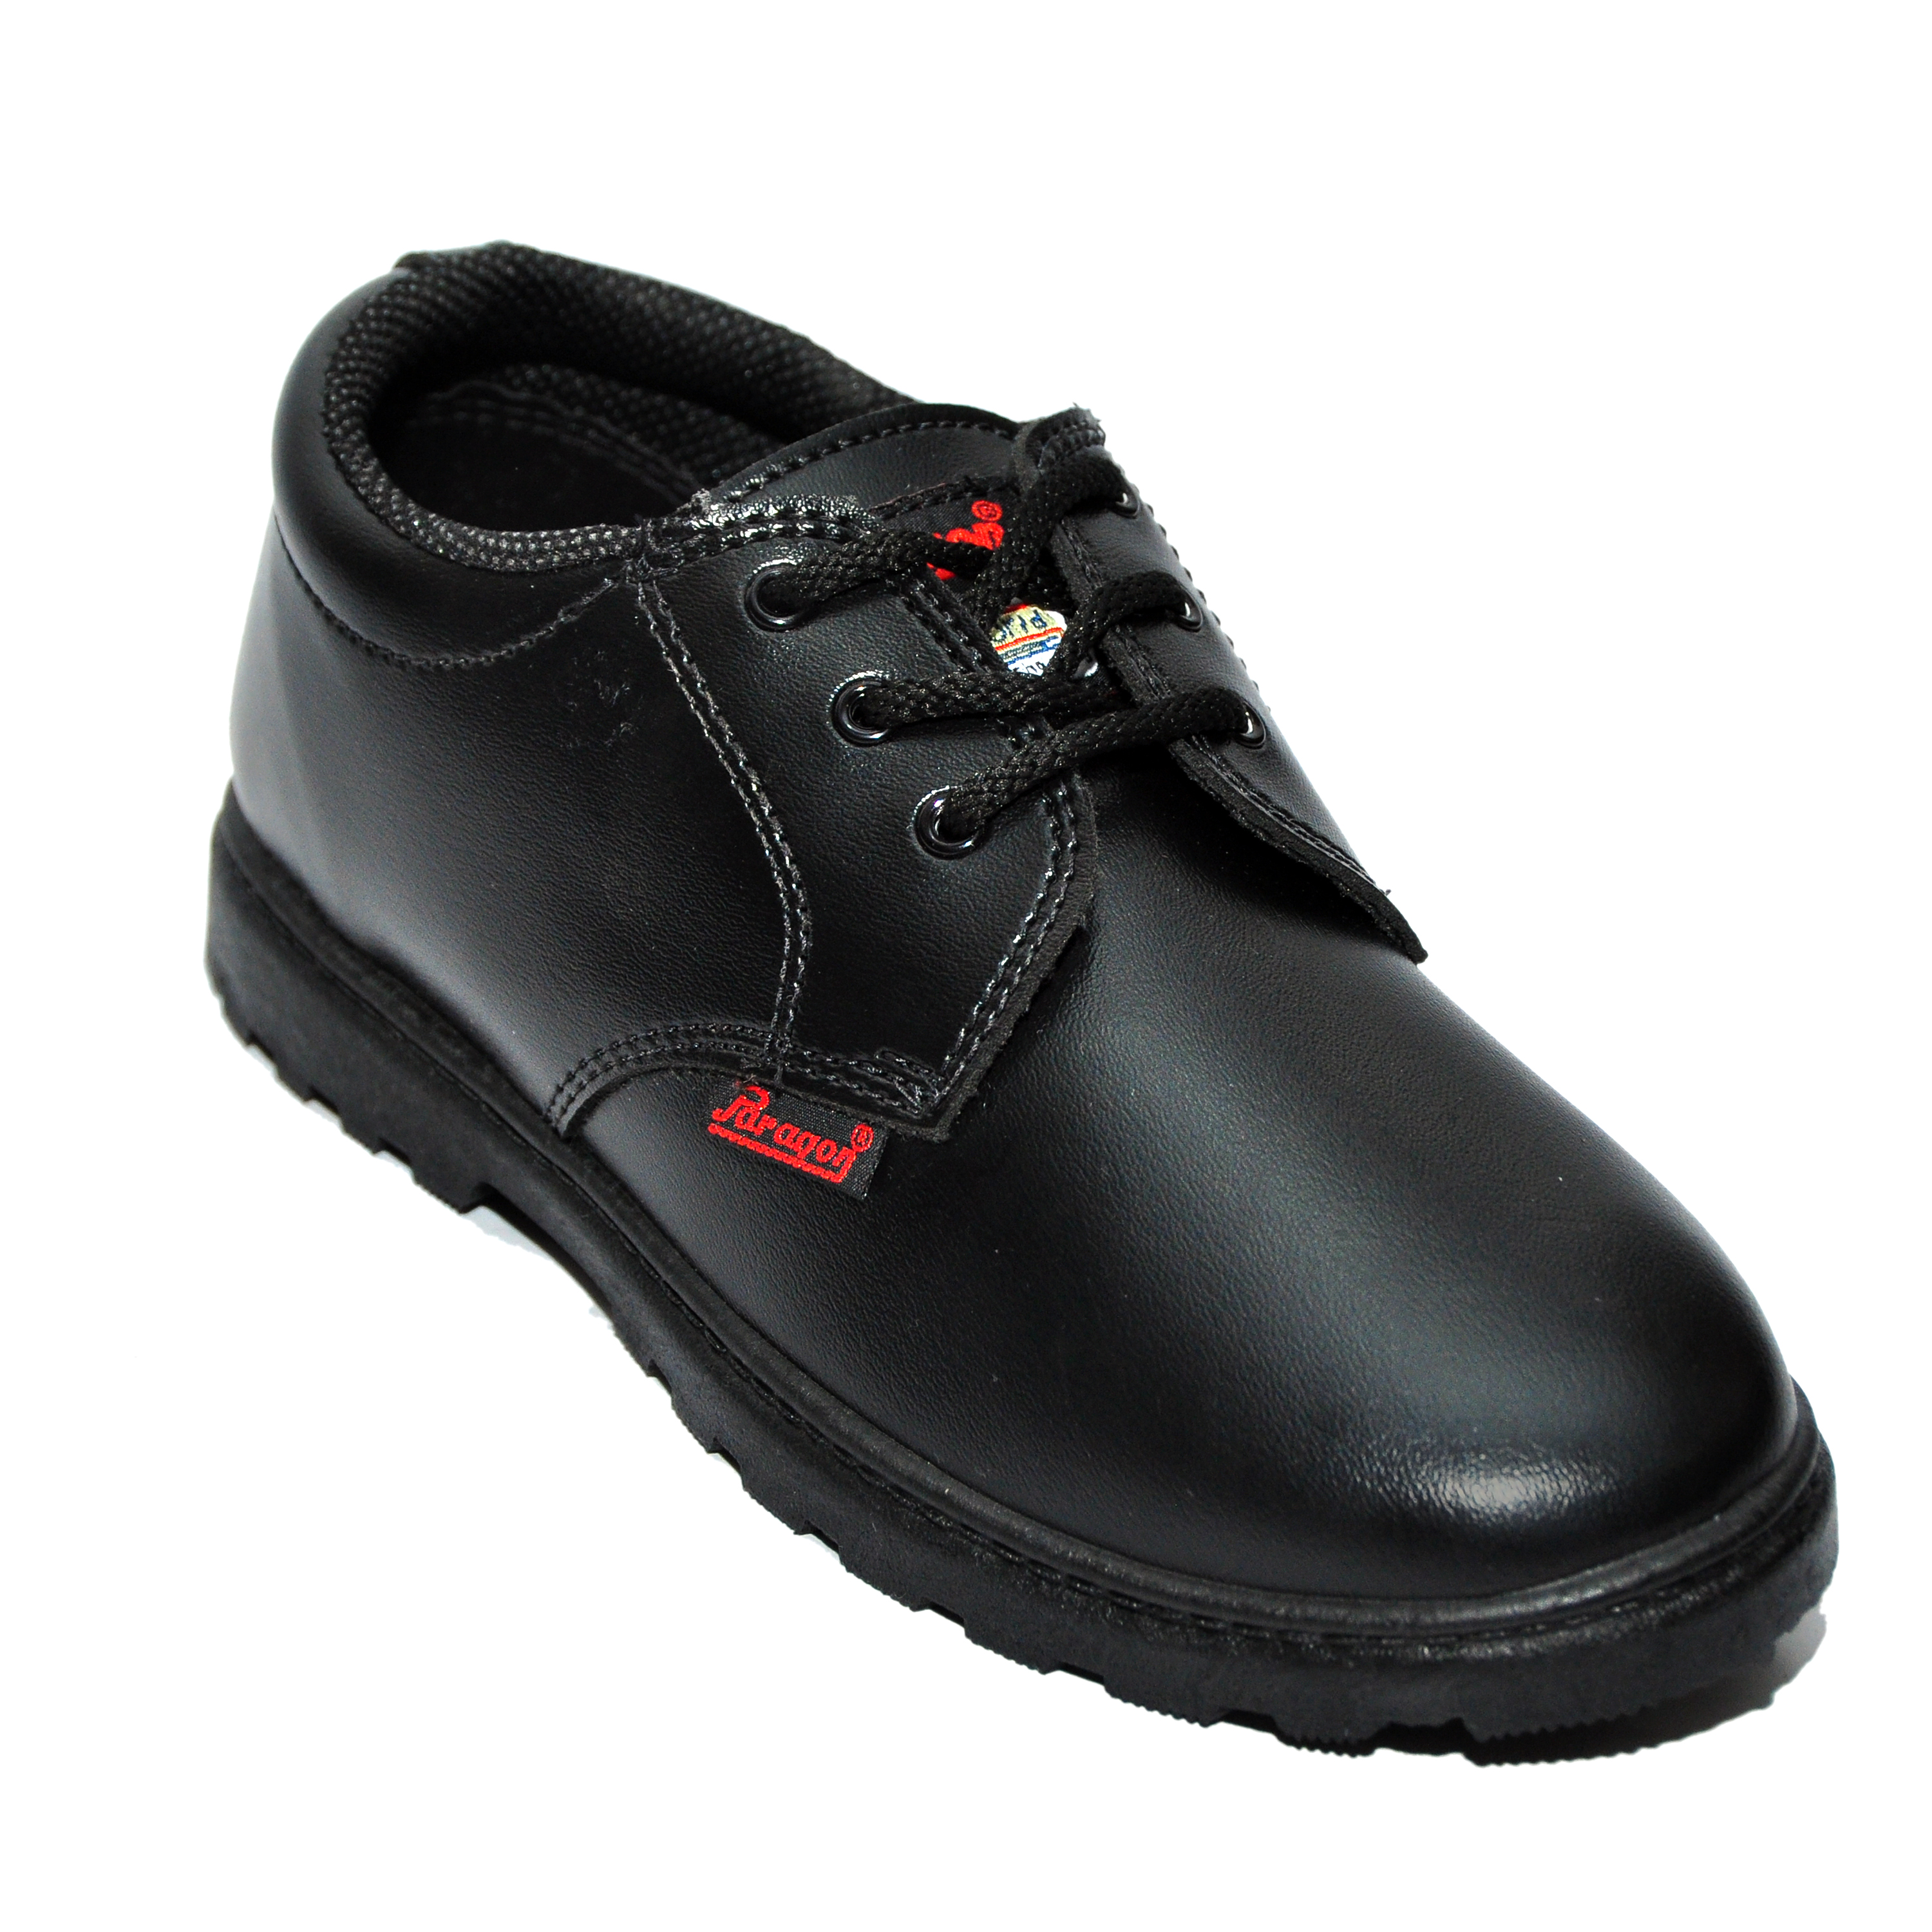 paragon school shoes for girls